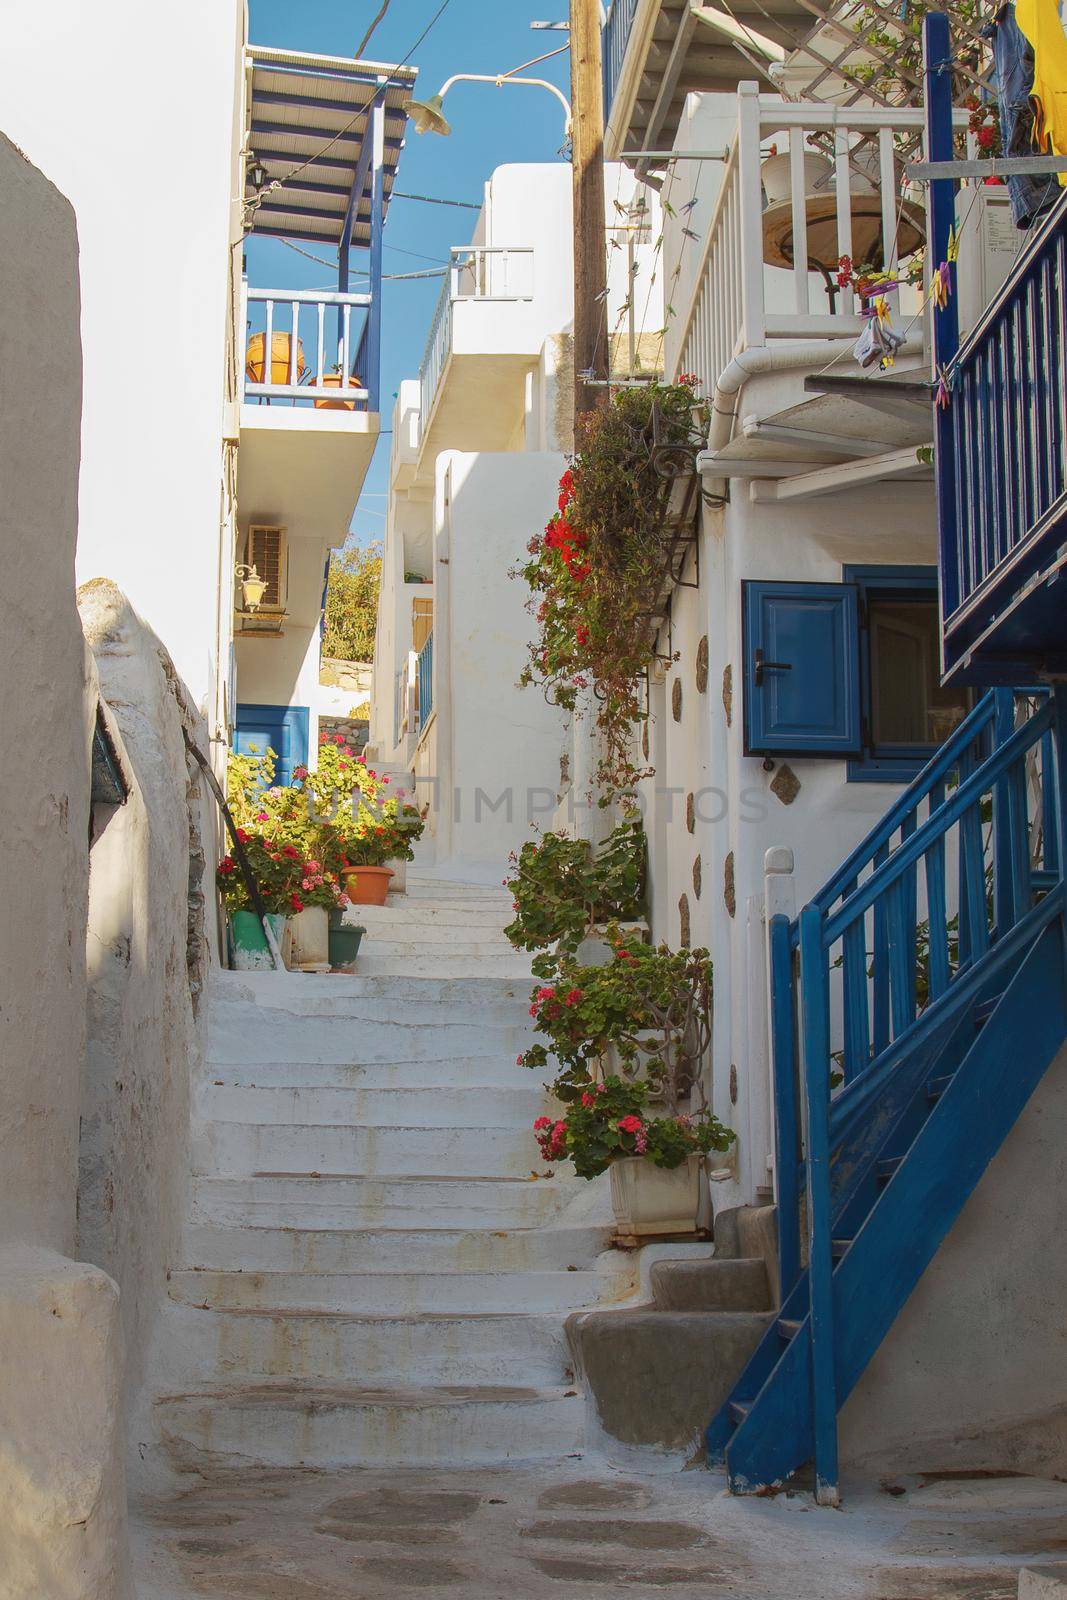 Typical Colors and Street in Mykonos Greece